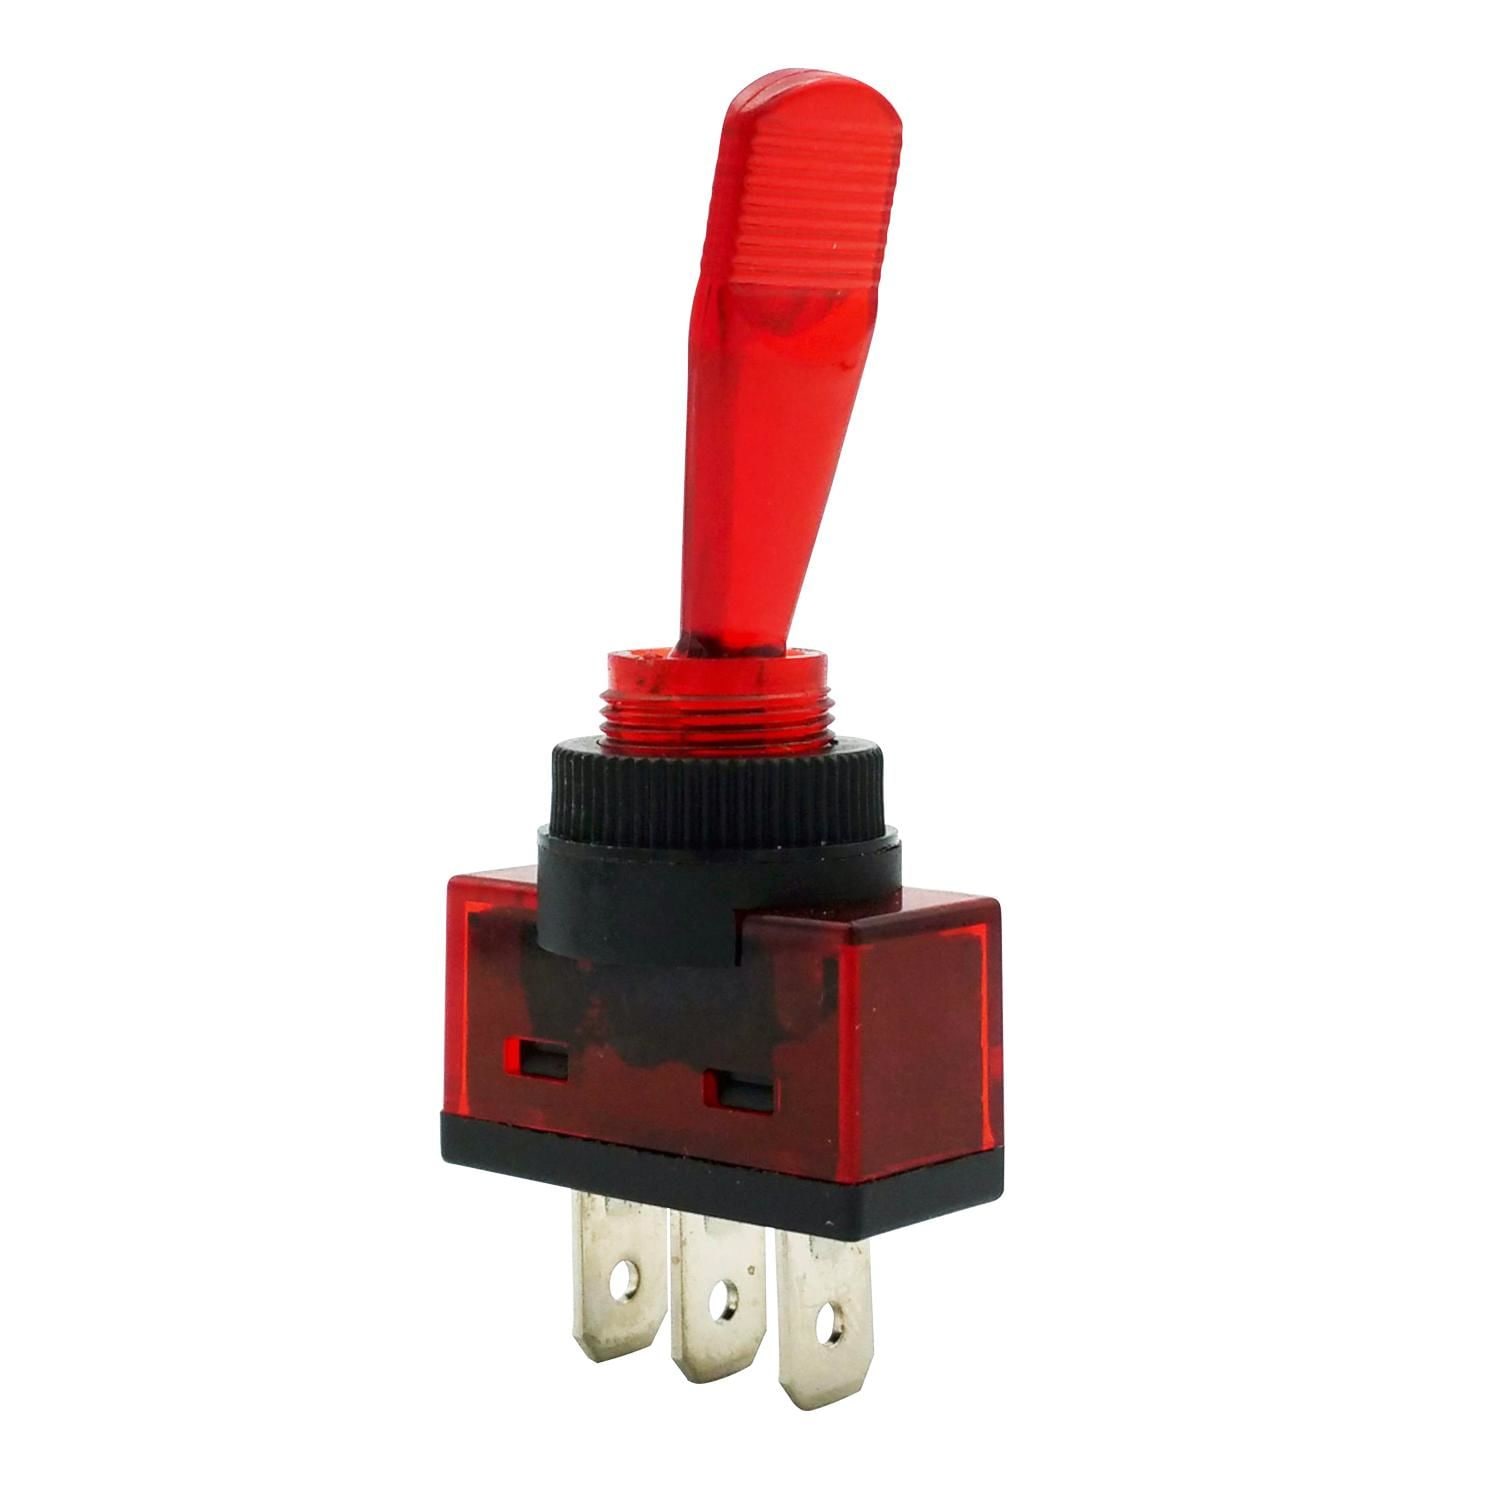 Toggle Switch and Cover - Illuminated (Red) - COM-11310 - SparkFun